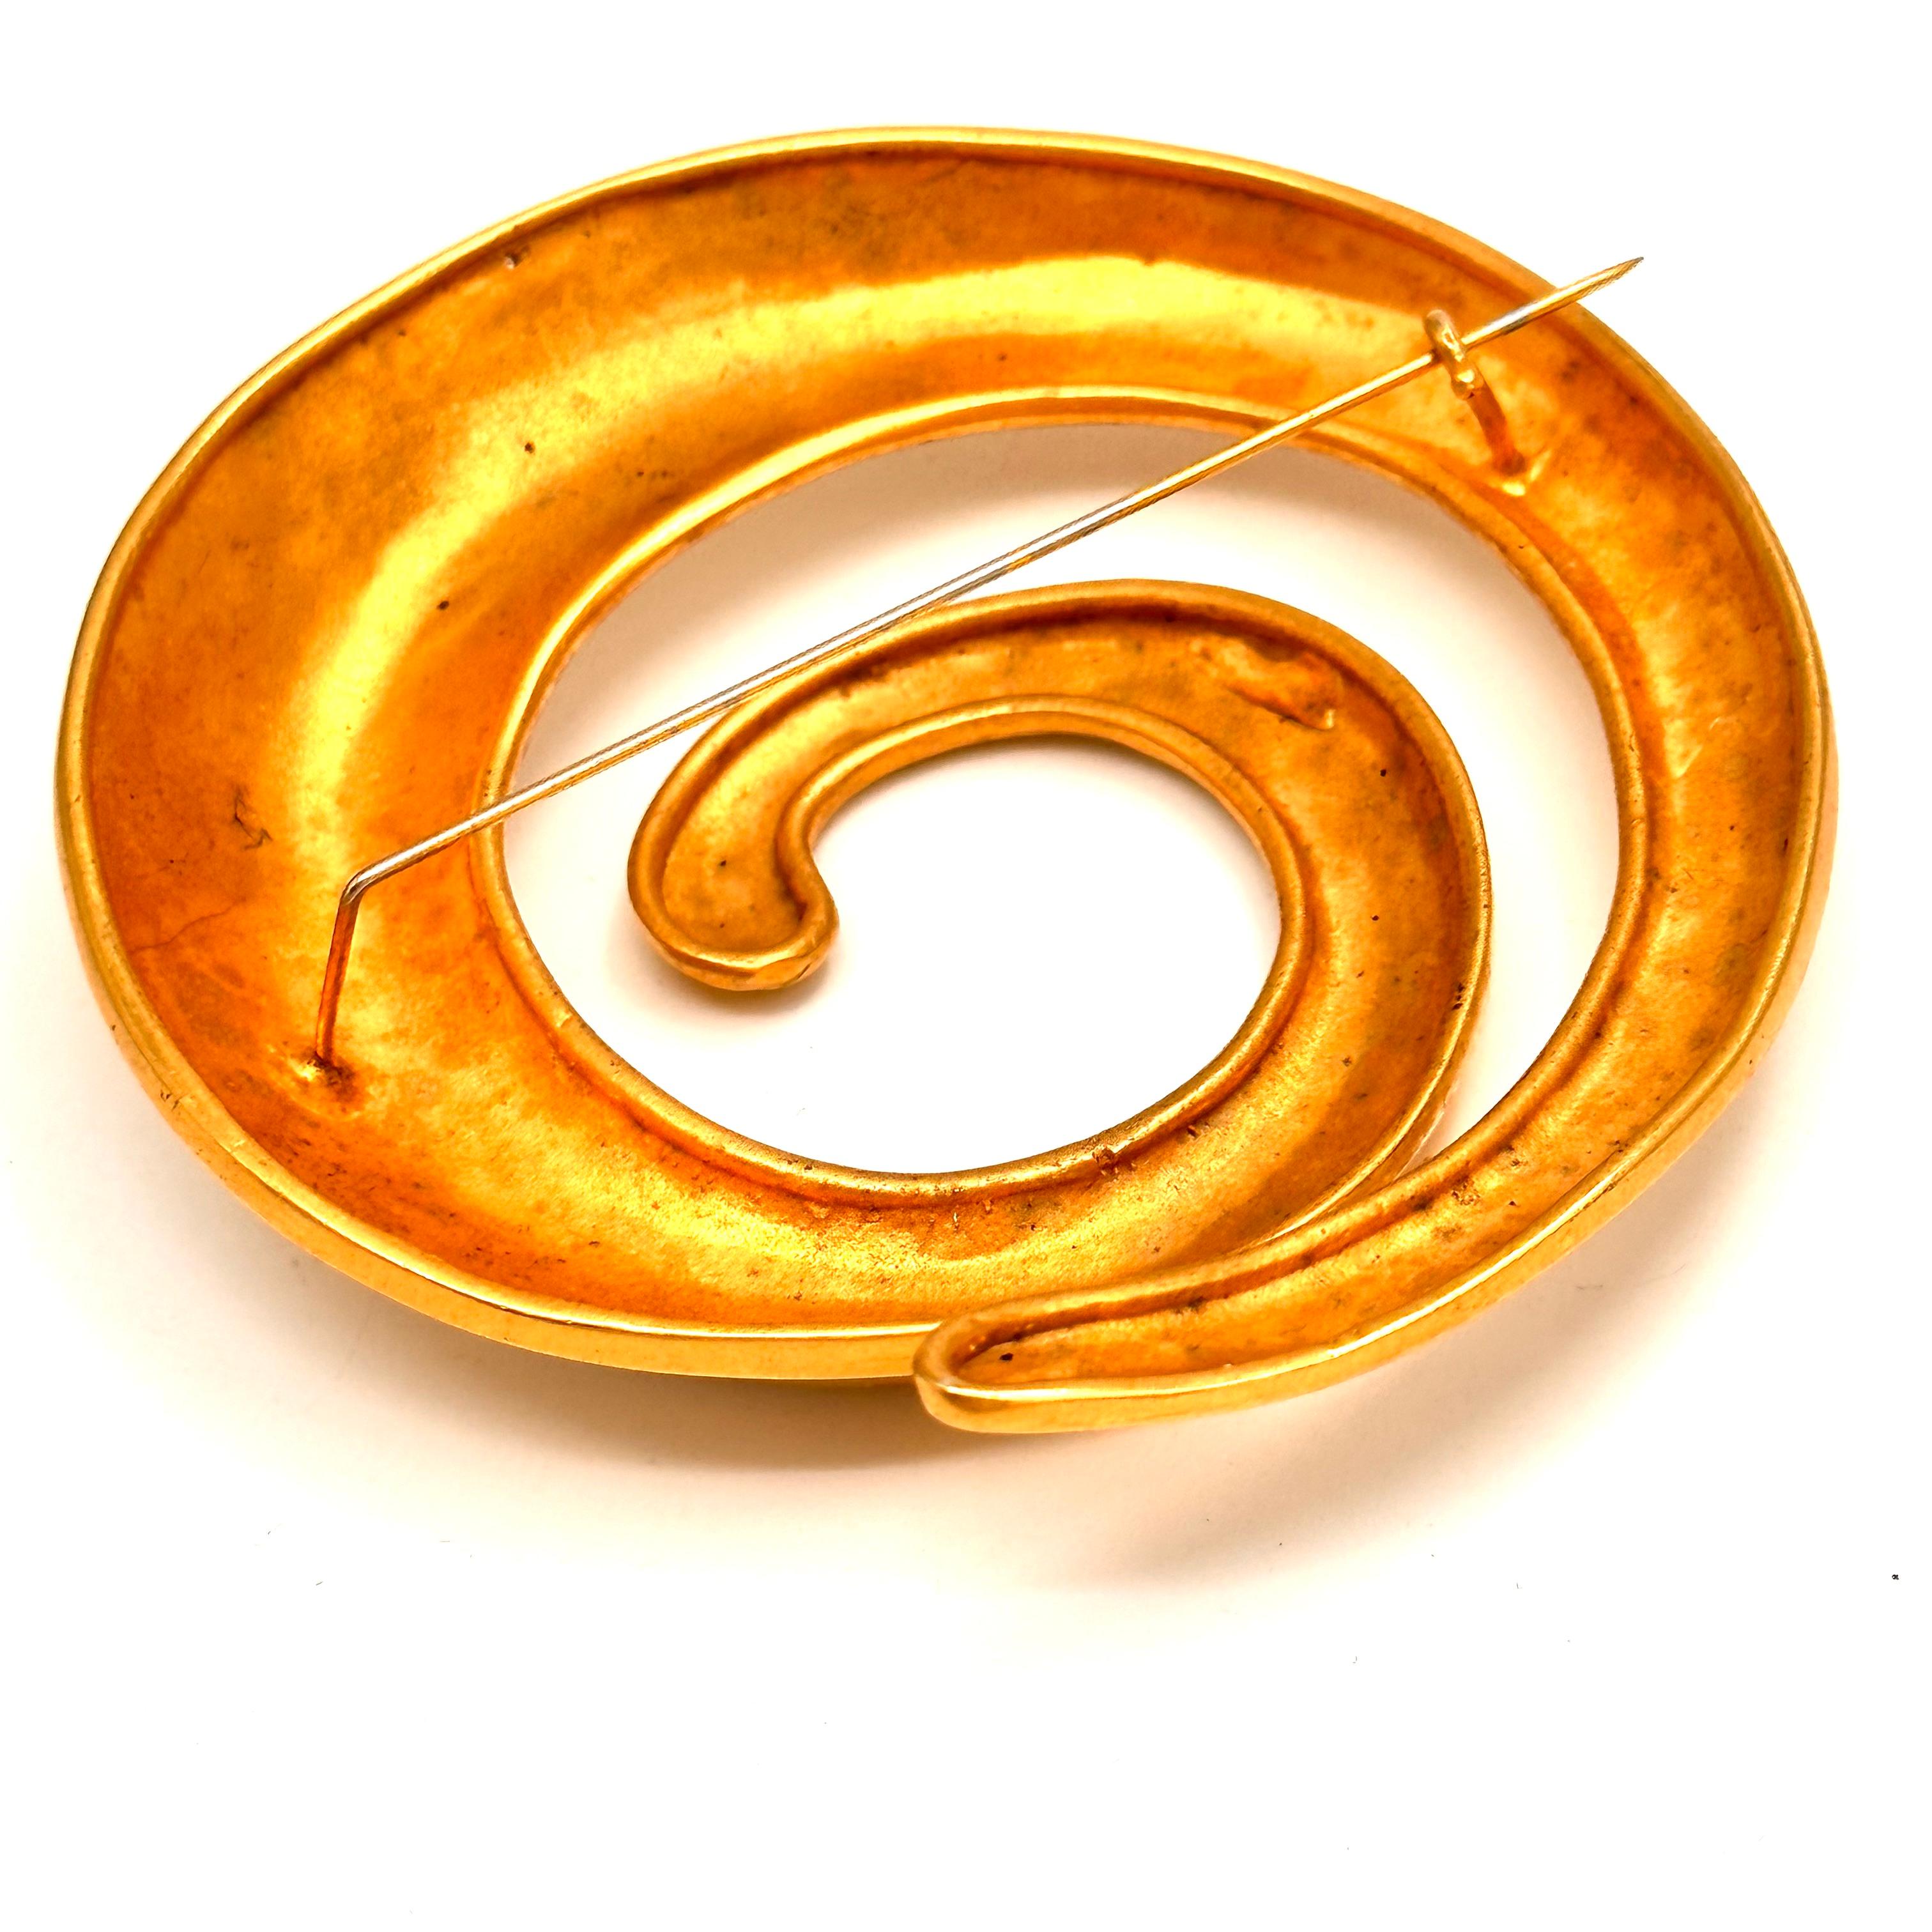 This dramatic coil of matte 24k gold plated on brass, is an iconic Robert Lee Morris style, it is his unique vocabulary of forms that are all family members to the organic movement. Forged into a swollen curvaceous form this brooch was part of a